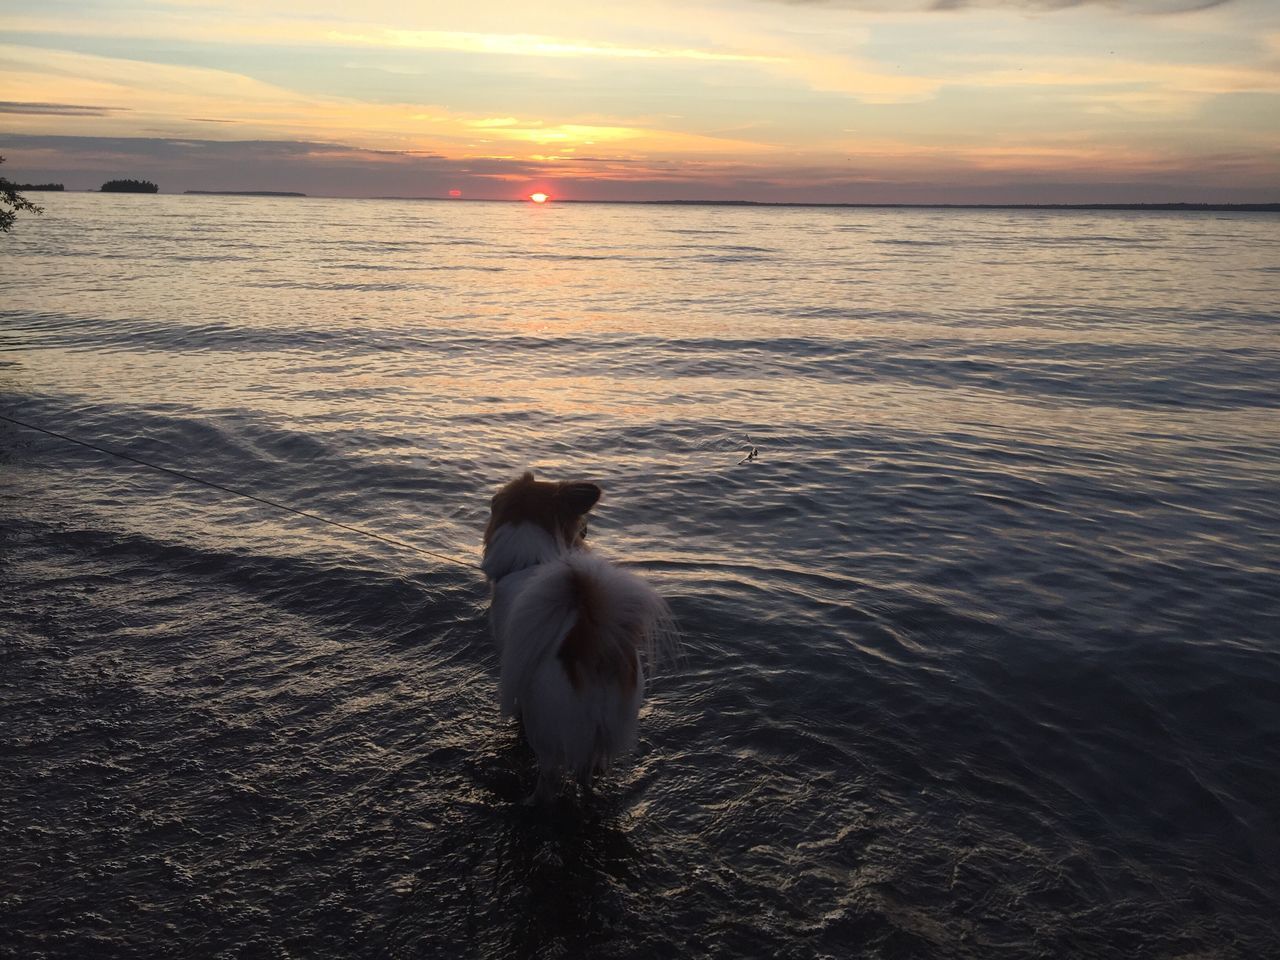 Chewie watching the sunset